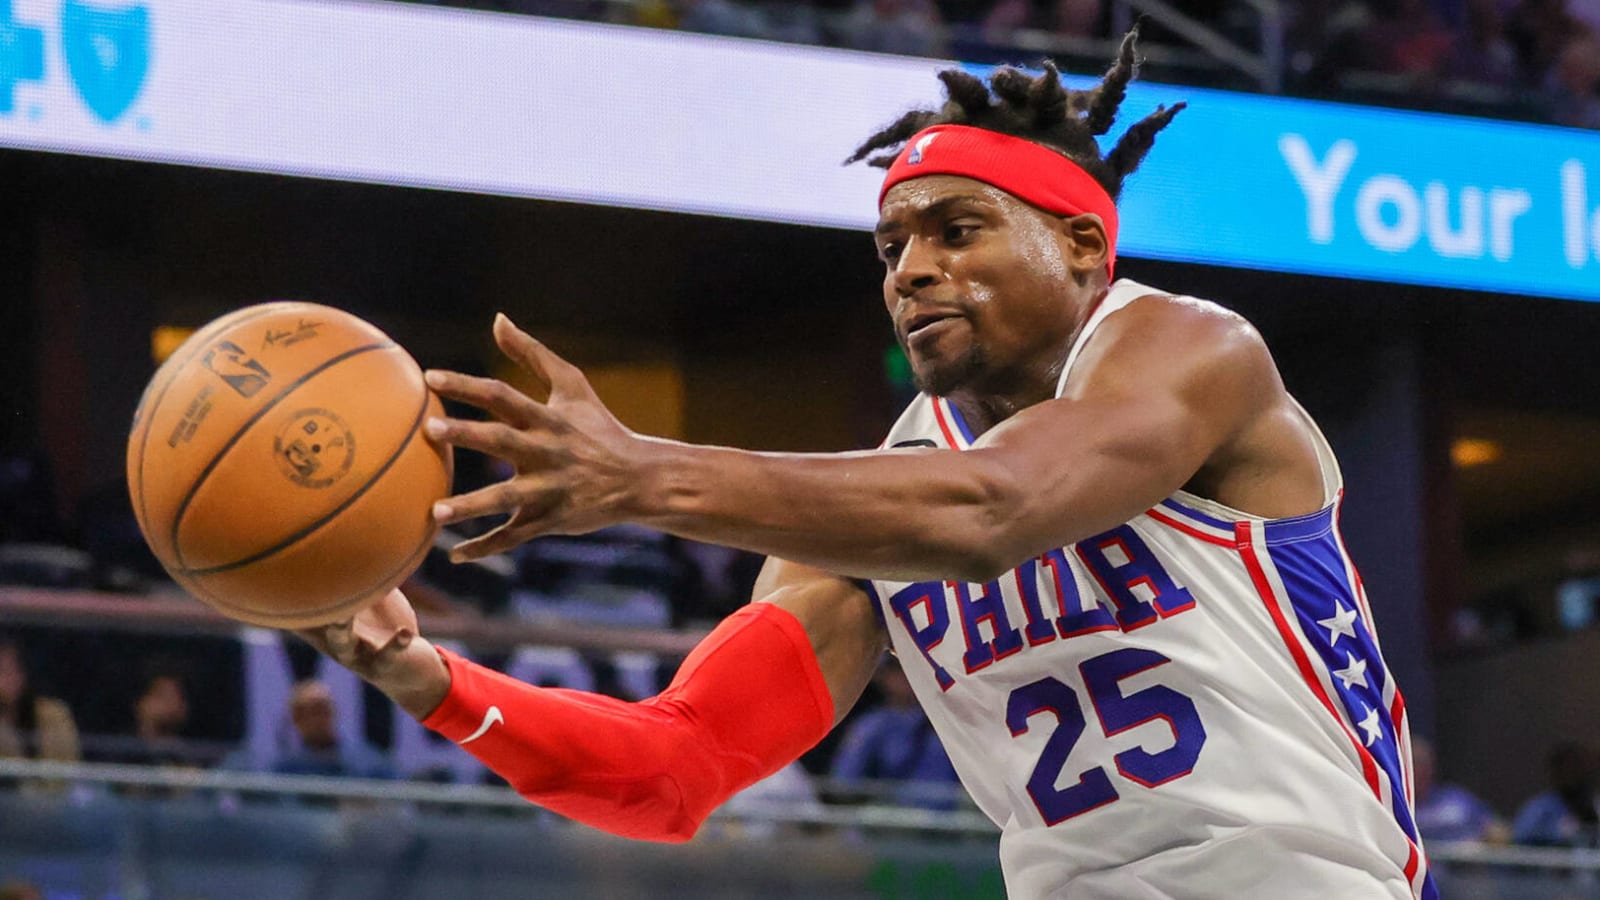 Watch: 76ers forward takes swipe at Doc Rivers